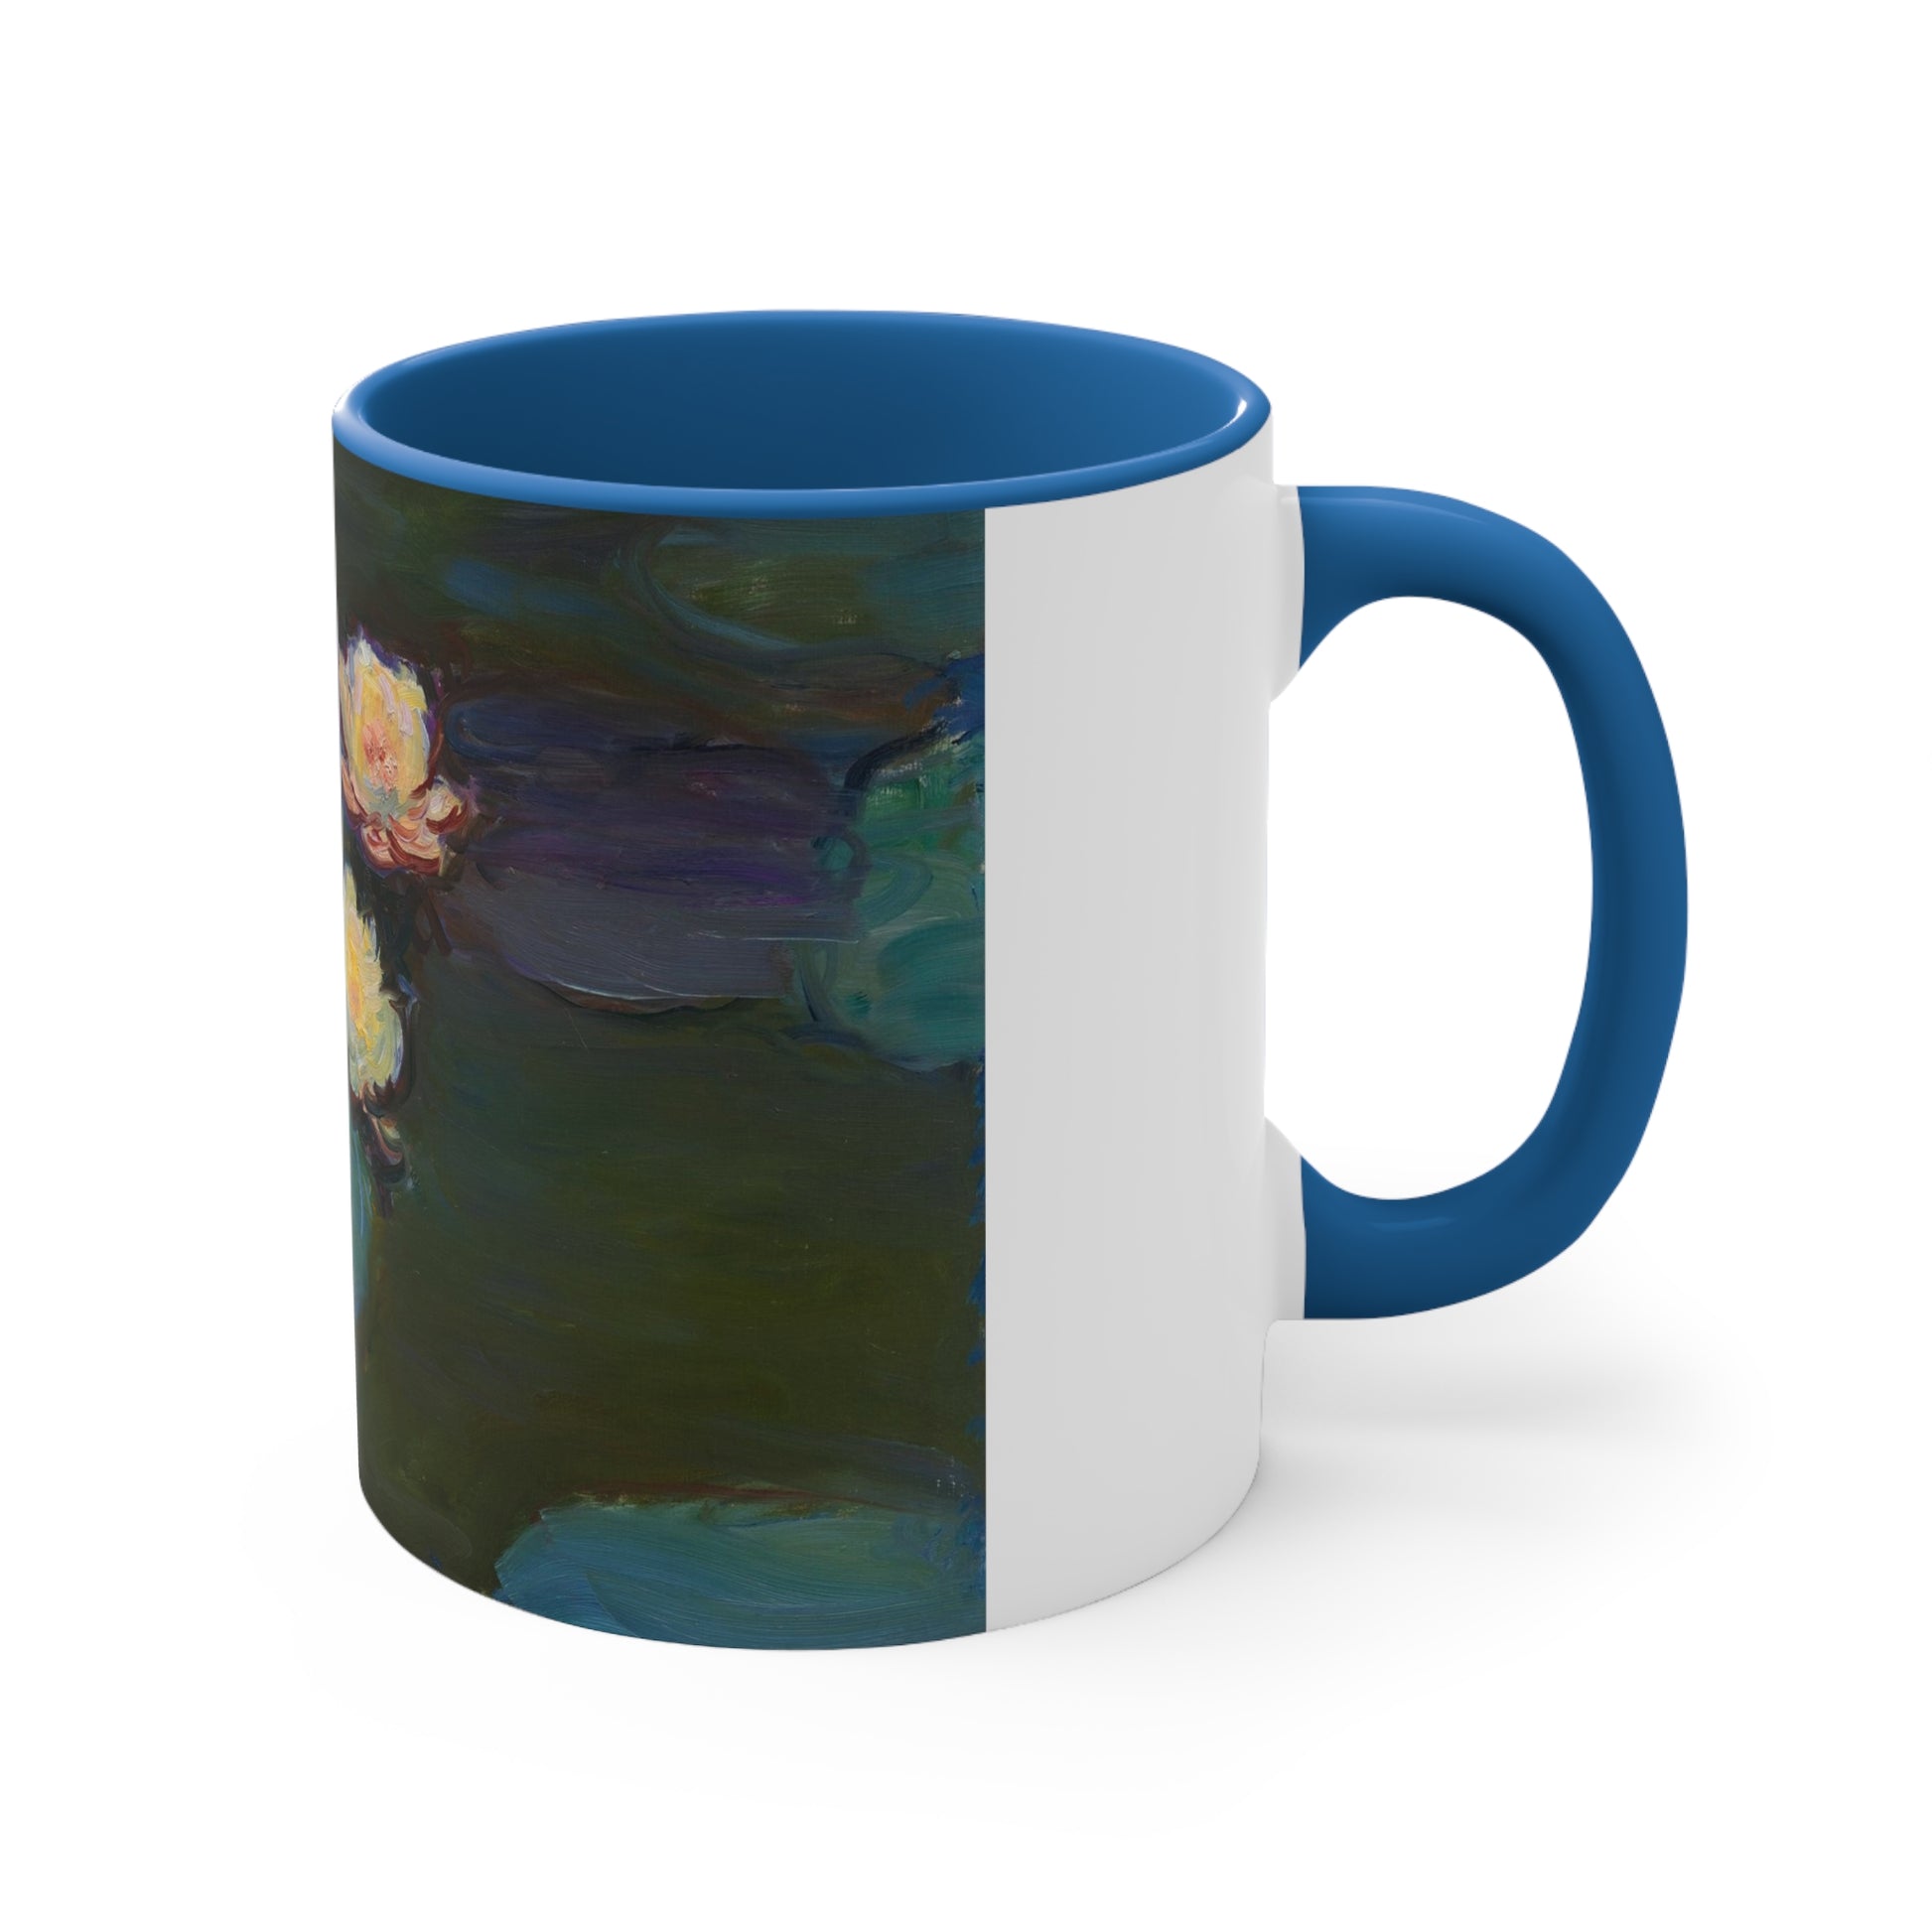 a blue and white coffee mug with a painting of a flower